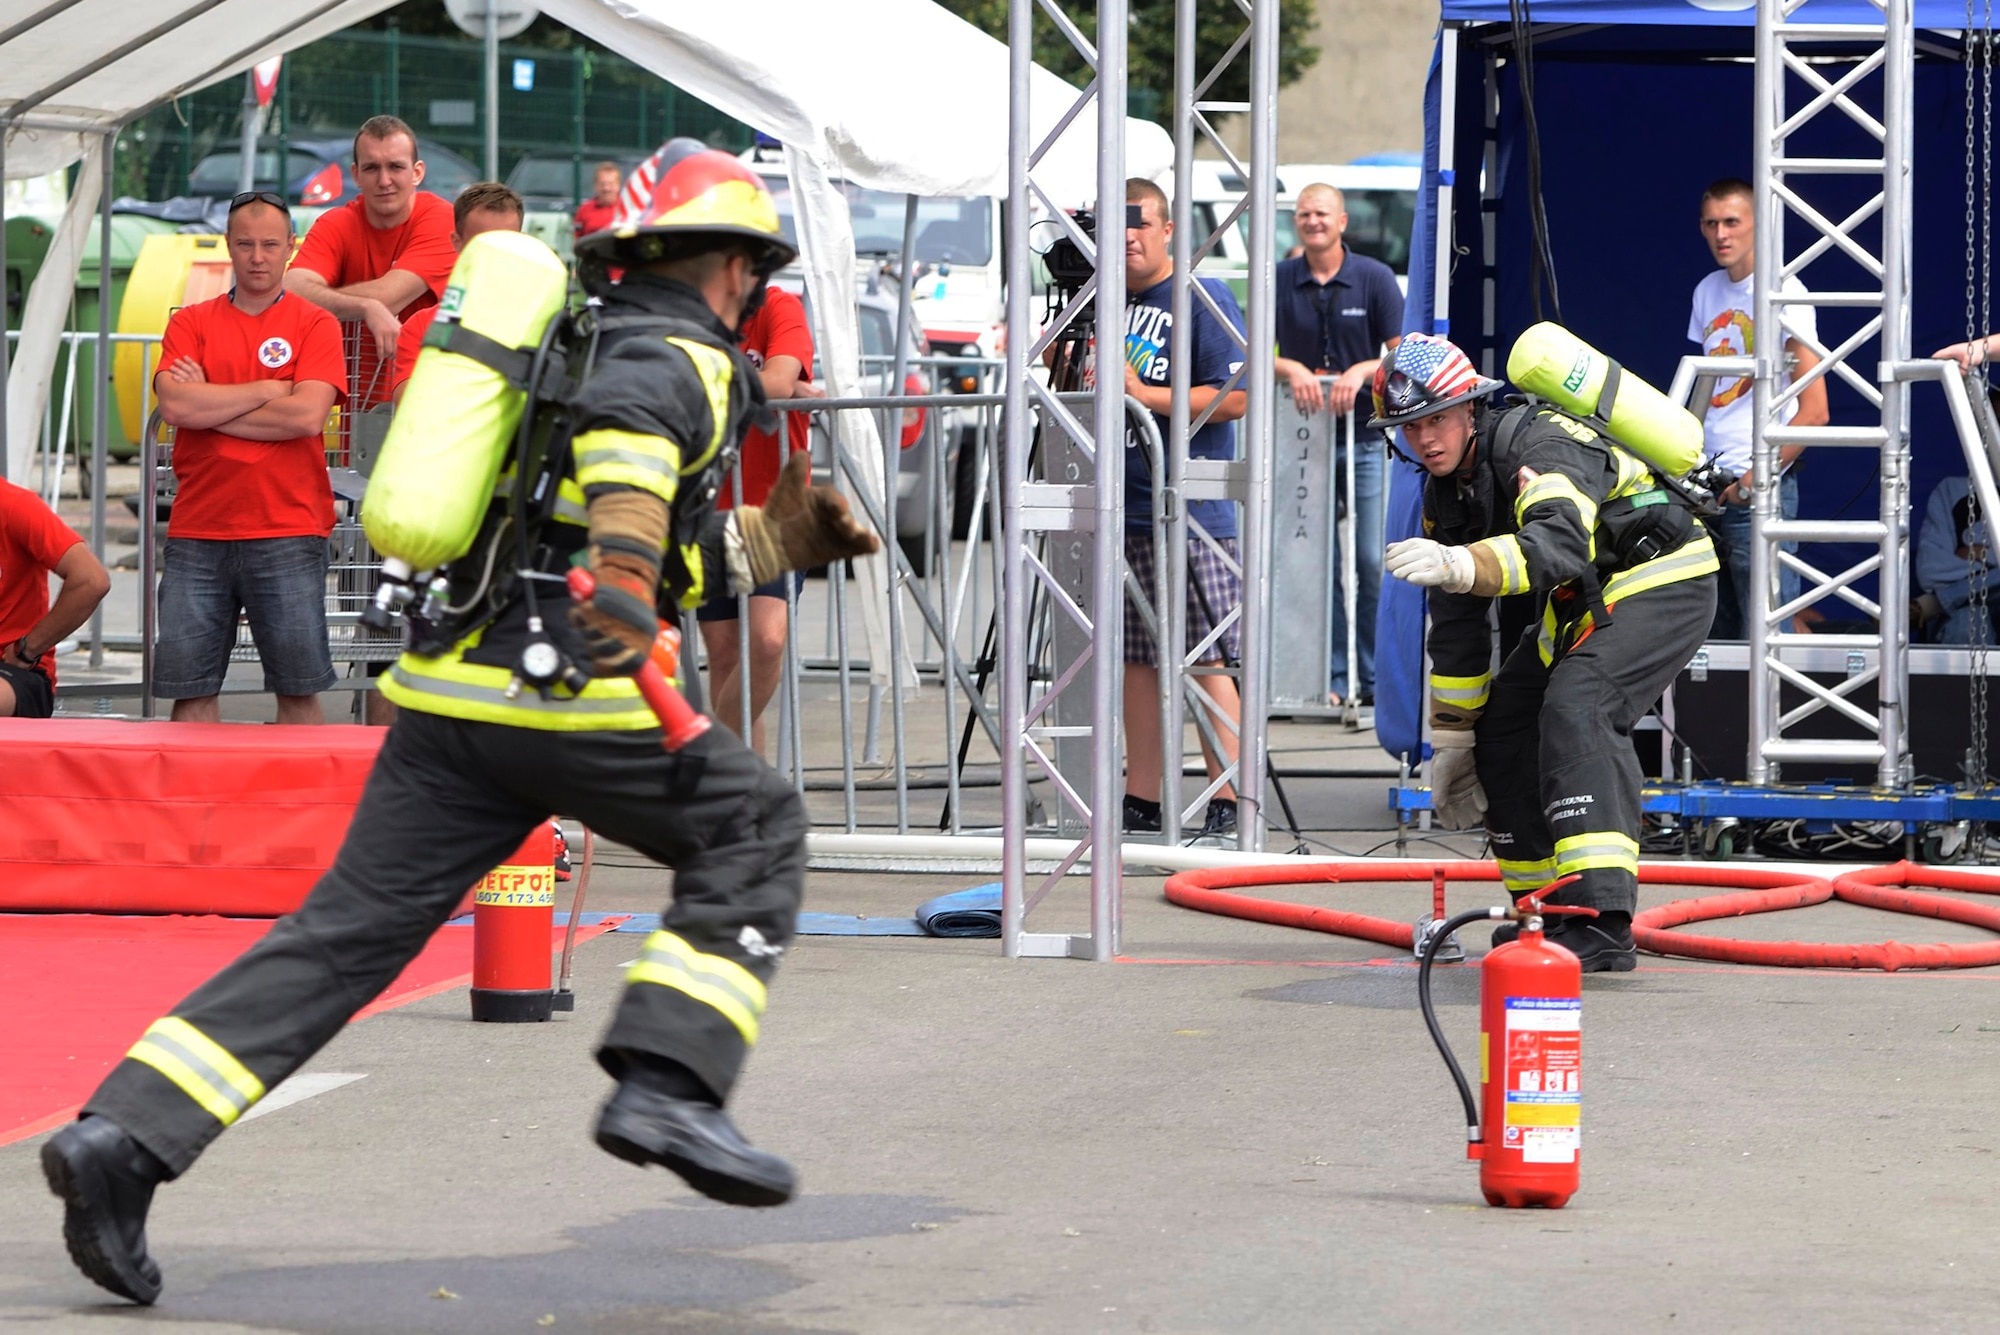 SPANGDAHLEM AIR BASE, Germany – U.S. Air Force Staff Sgt. Benjamin Gonsales, a 52nd Civil Engineer Squadron firefighter from Savannah, Ga., weaves through fire extinguisher obstacles to pass a baton to Airman 1st Class Scott Weeks 52nd Civil Engineer Squadron firefighter from Green Bay, Wis., during the annual Szczecin Firefighter Combat Challenge in Szczecin, Poland, Aug. 9, 2013. Teams from Spangdahlem and Ramstein Air Base participated in the event. (U.S. Air Force photo by Staff Sgt. Christopher Ruano/Released)